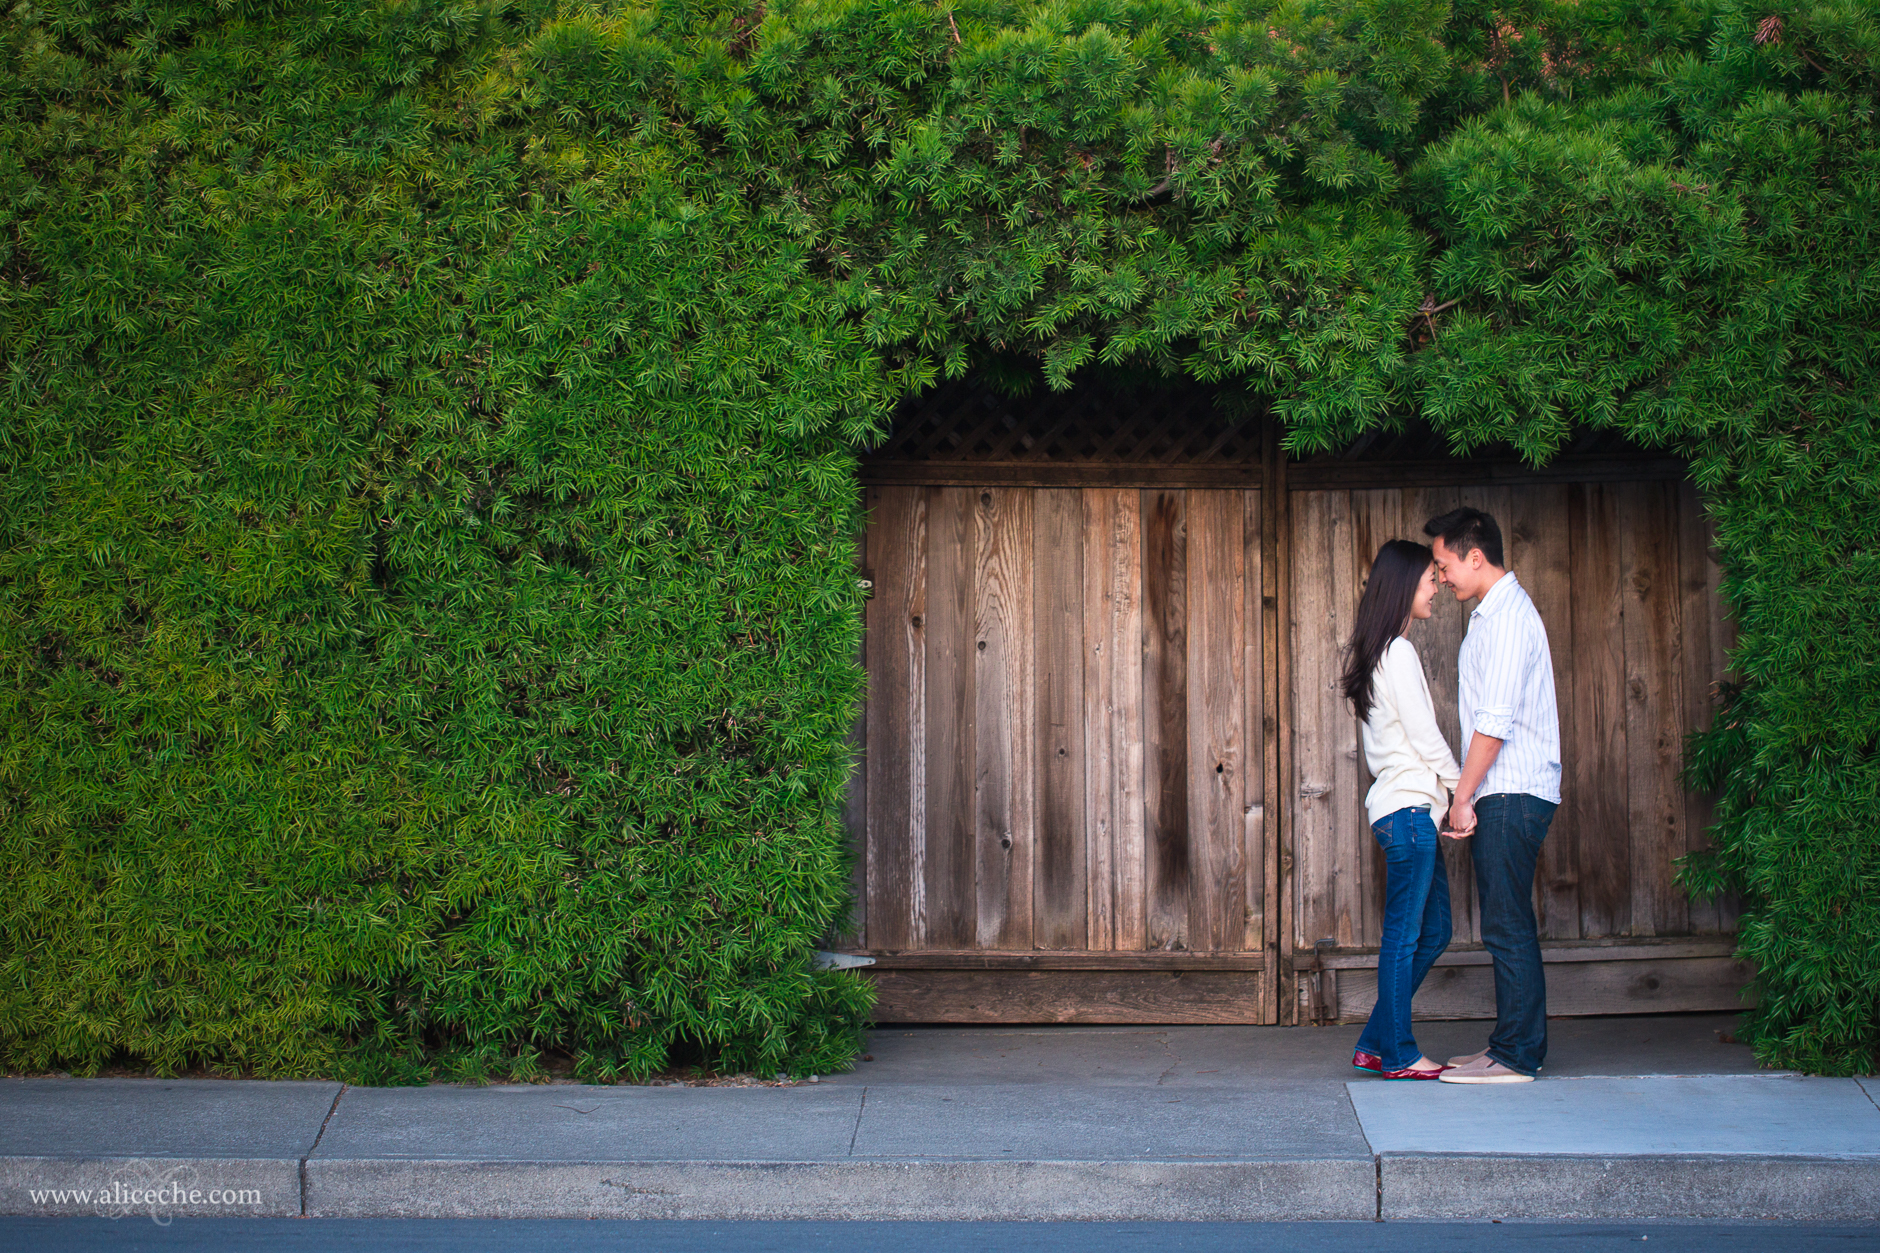 alice-che-photography-union-city-engagement-couple-composition-framing-greenery